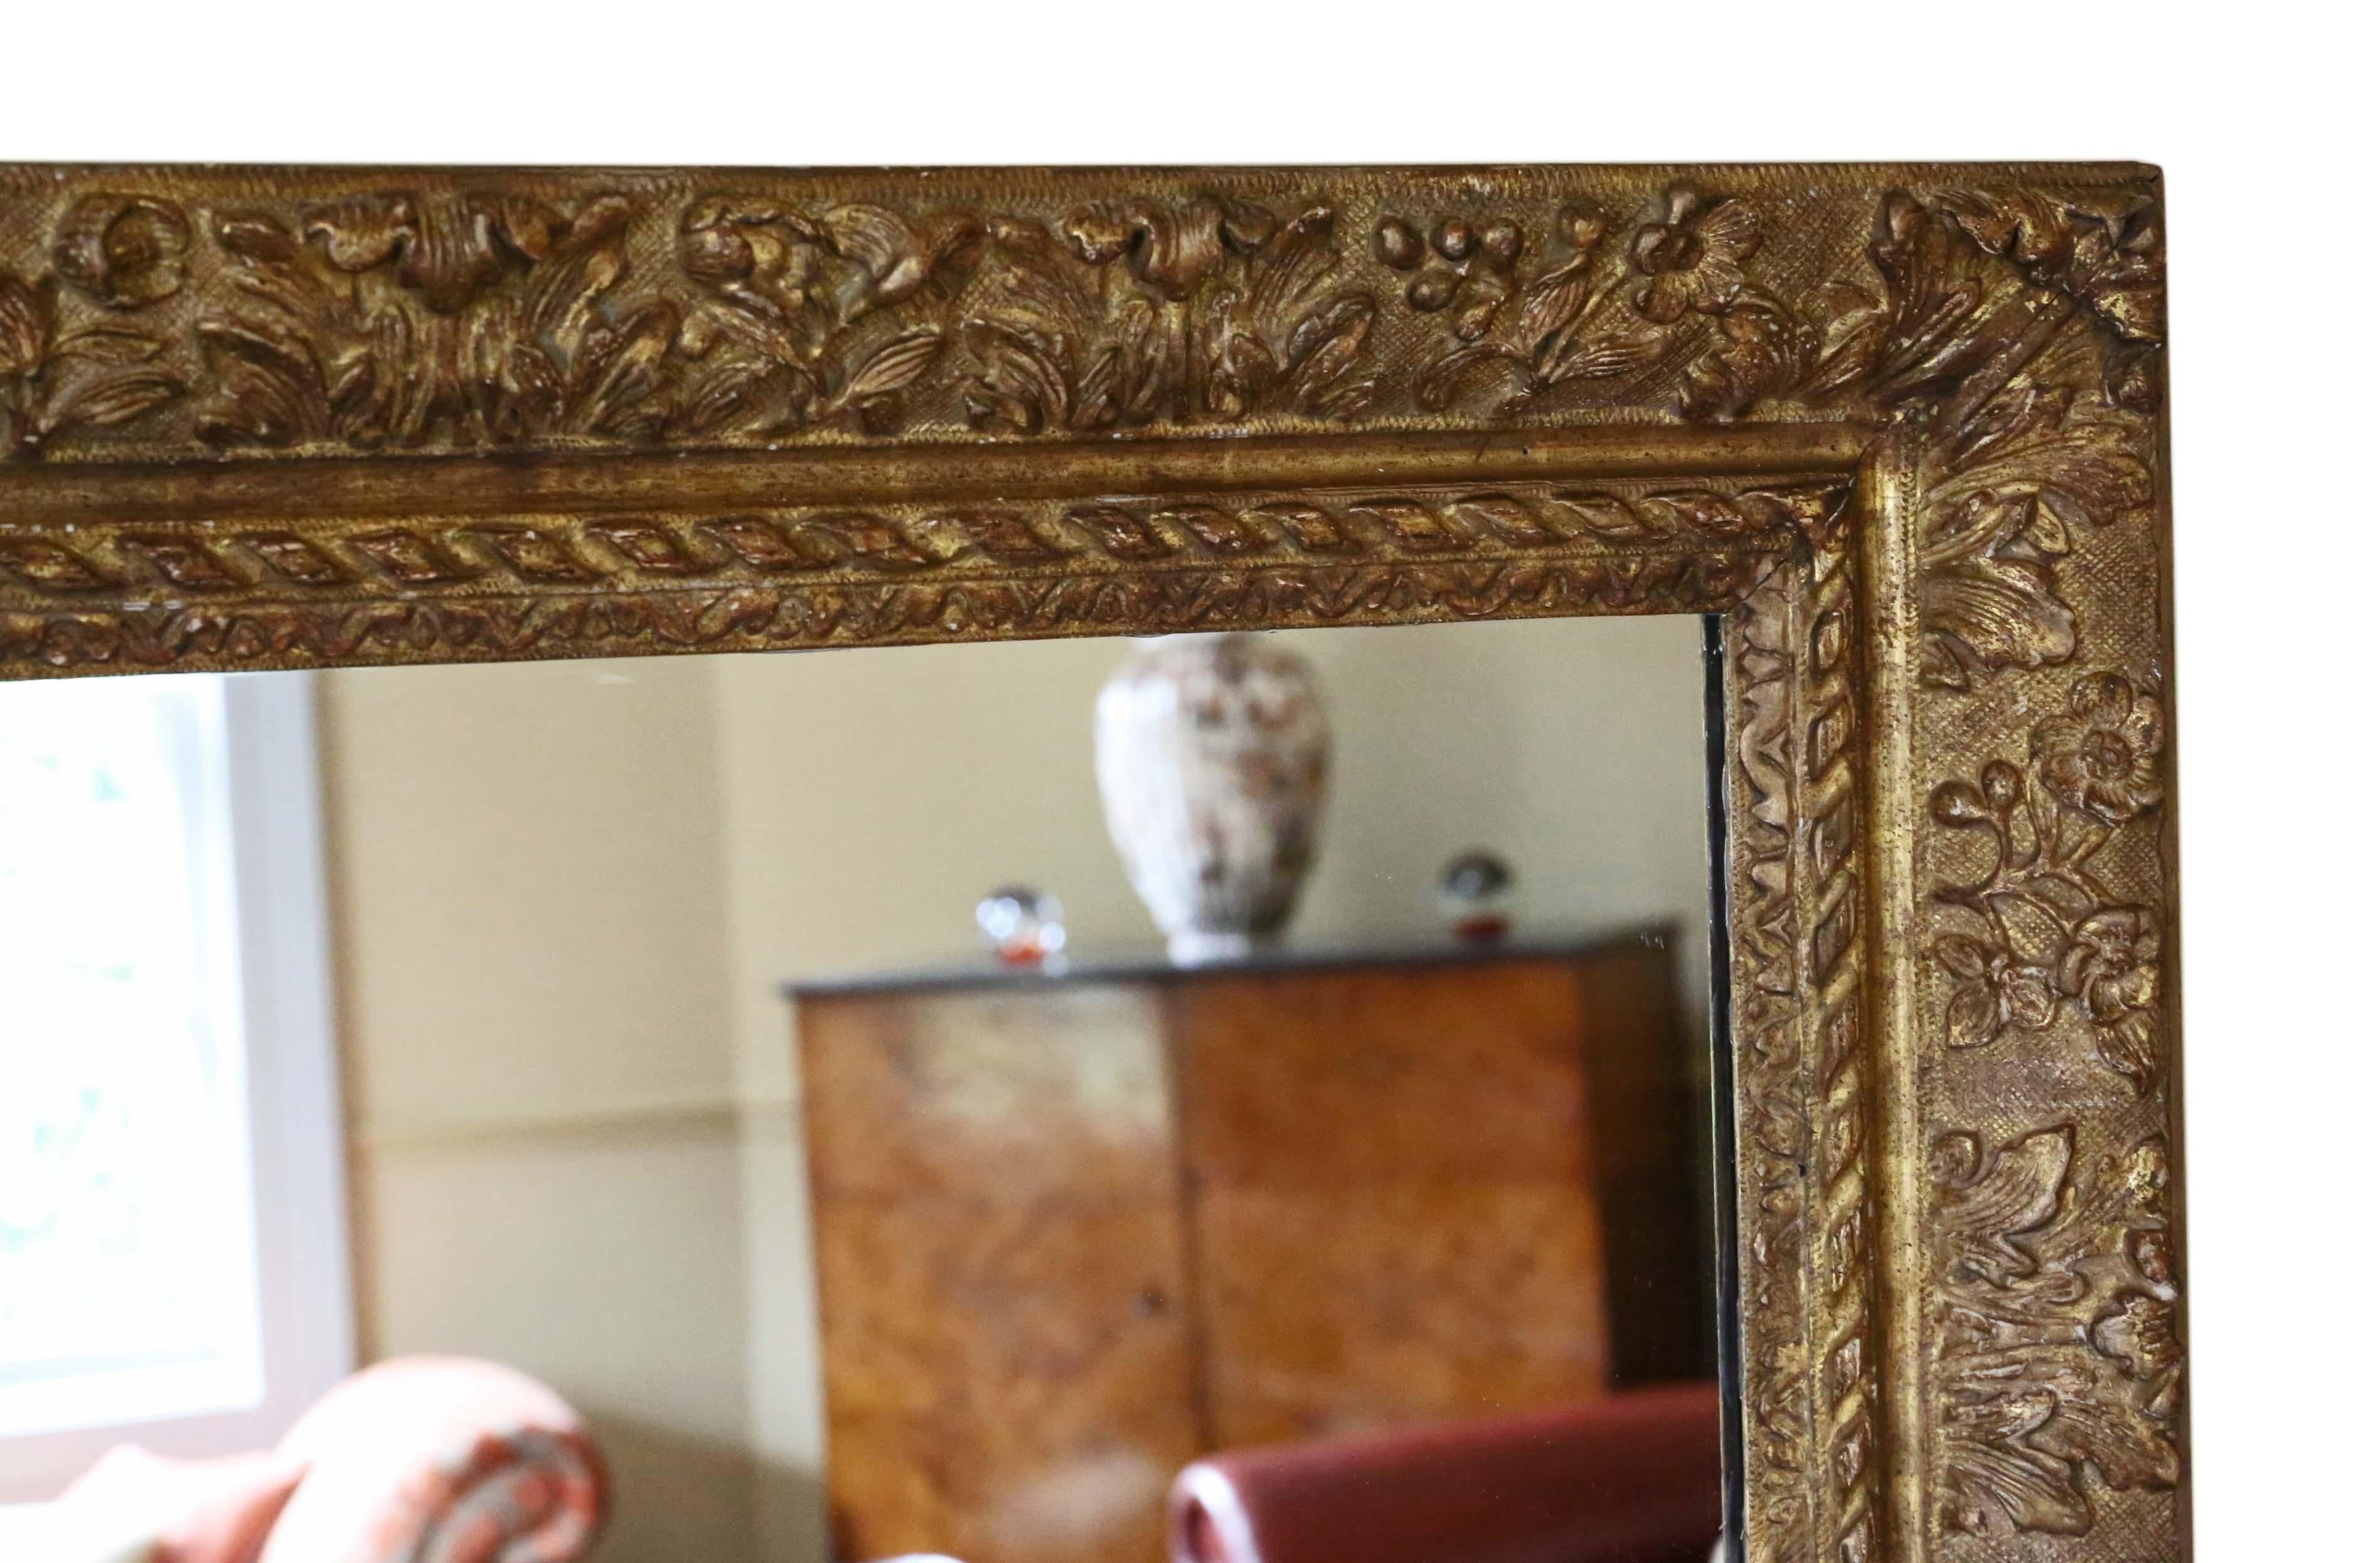 19th Century Louis XIV style gilt overmantle or wall mirror. A great look. Believed to have originally housed an early 17th Century Dutch painting by Jan Van Goyen (his paintings can reach high 6 figure sums). Not sure how old the frame is but